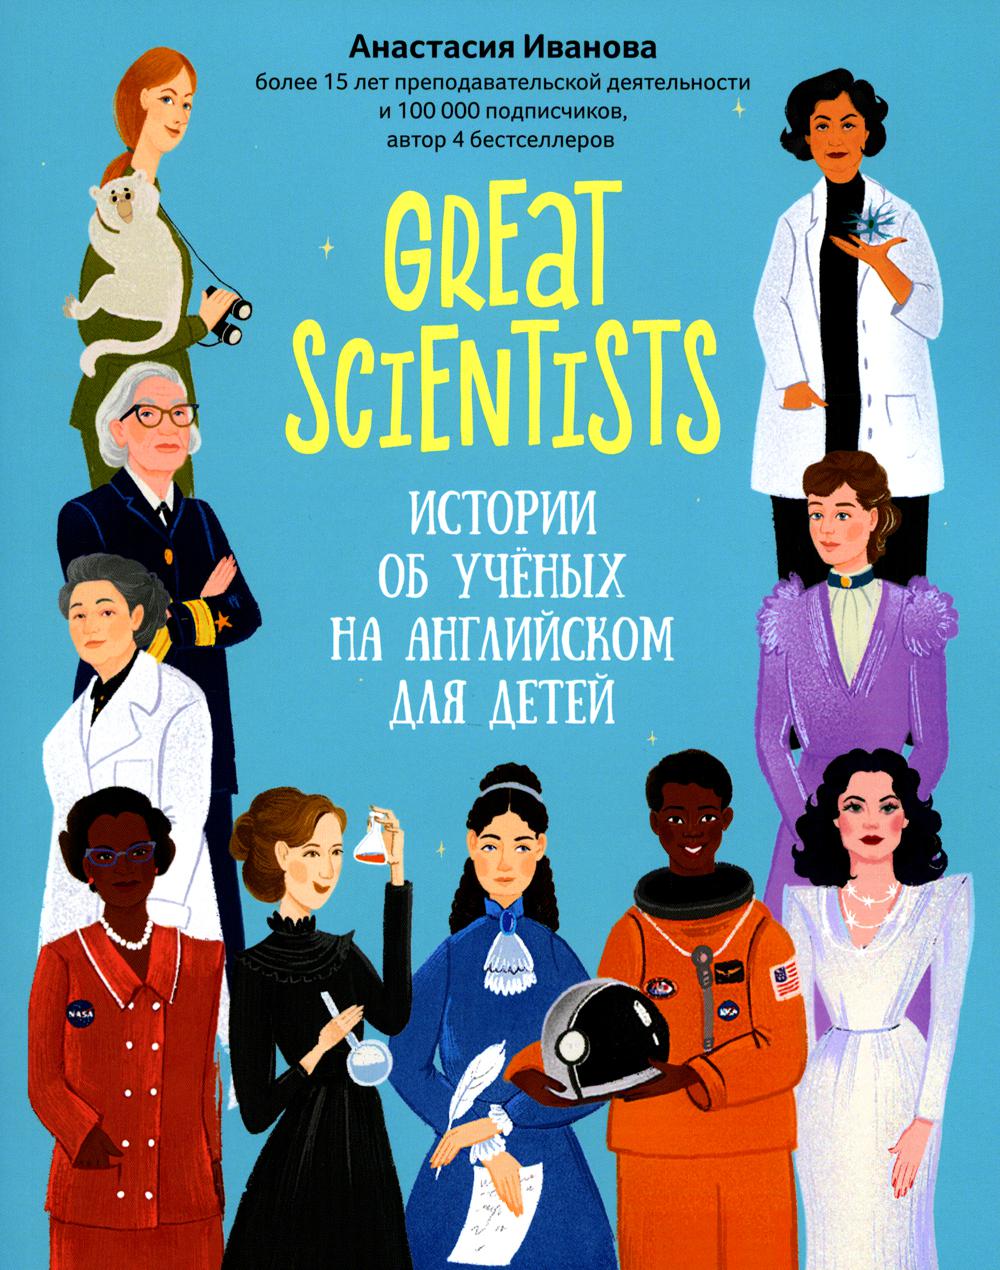 Great scientists:        